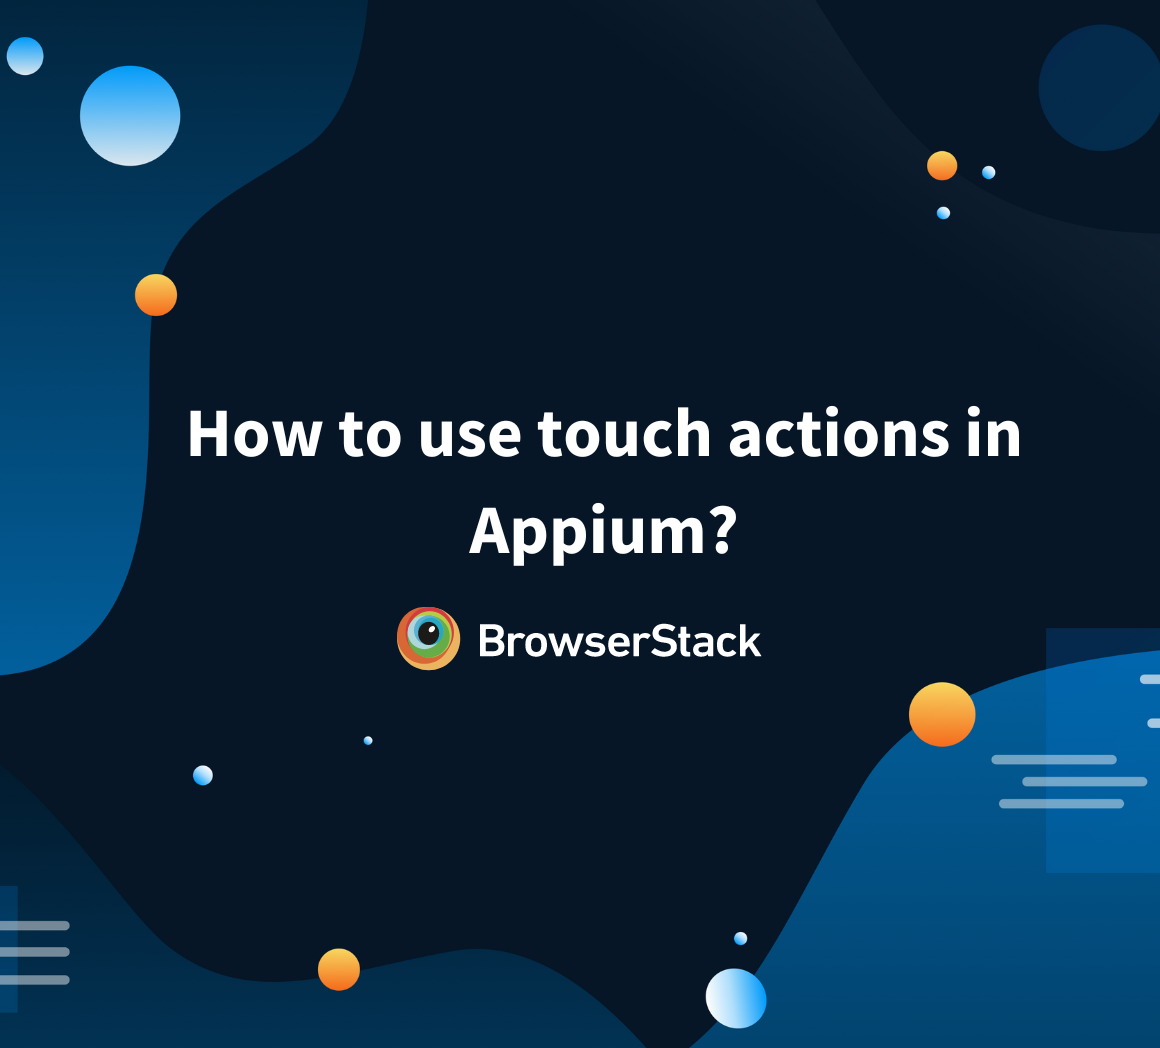 How to use touch actions in Appium